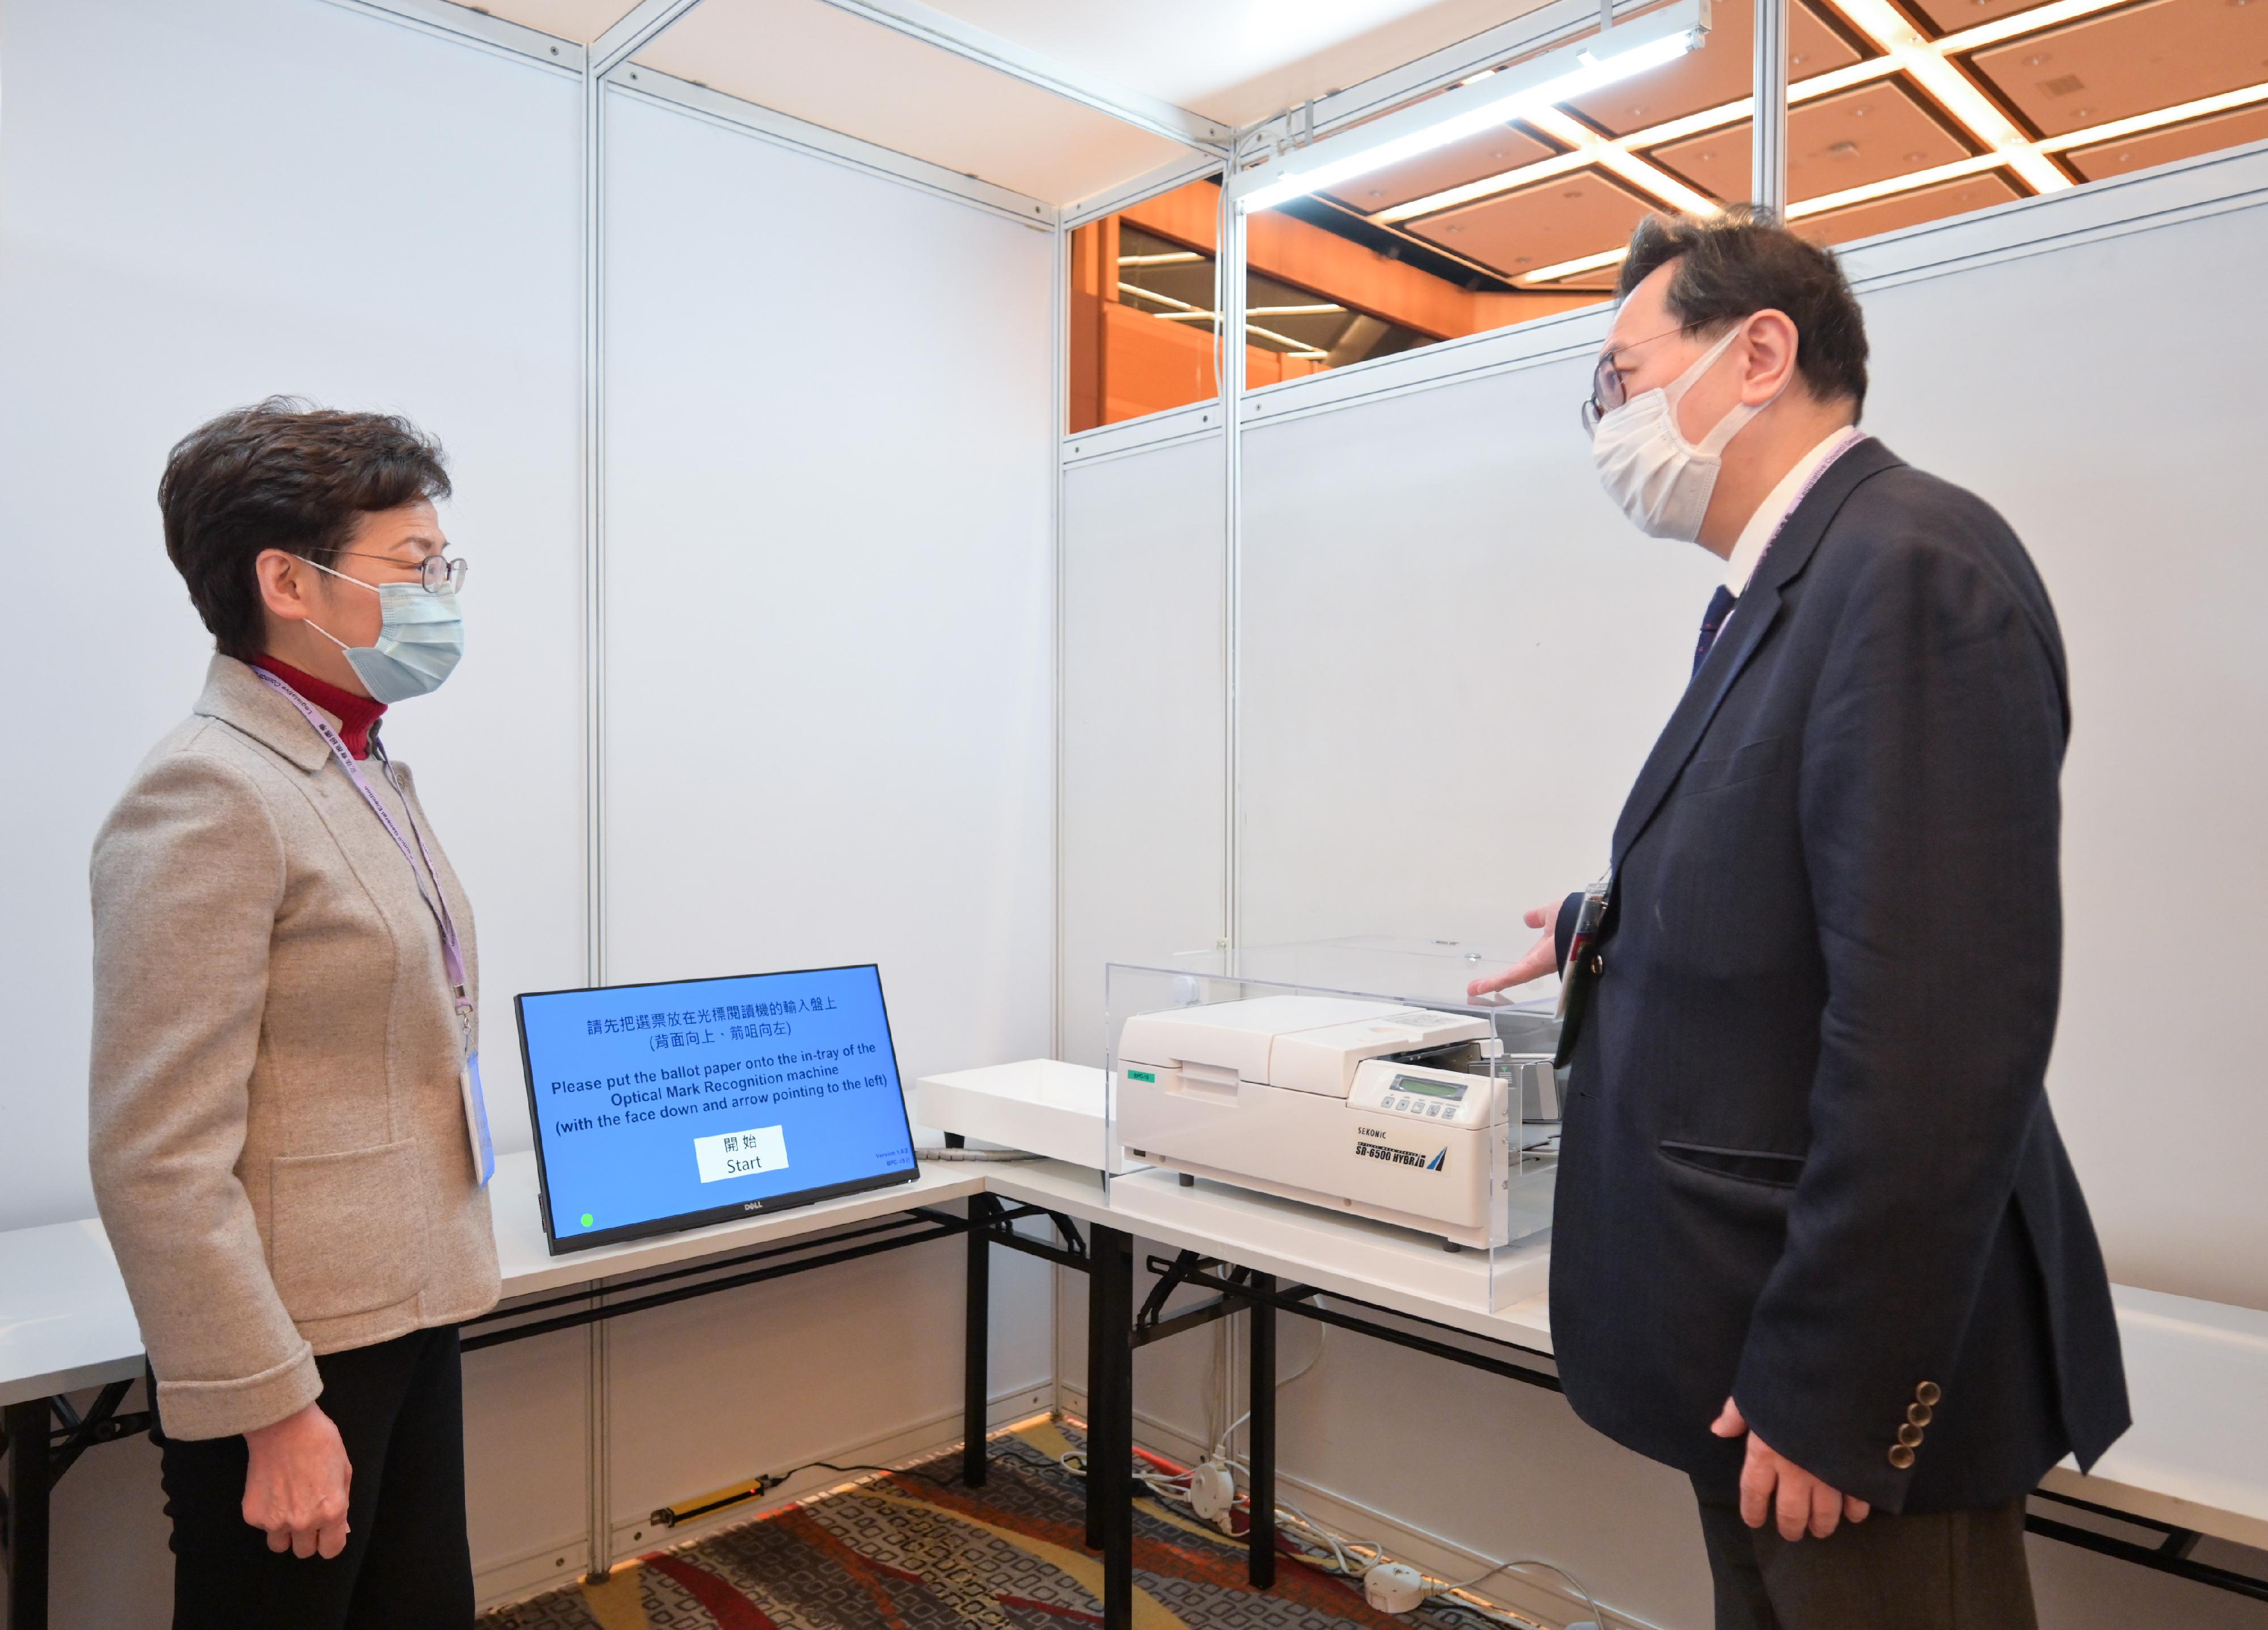 The Chief Executive, Mrs Carrie Lam, visited the Election Committee constituency polling station of the 2021 Legislative Council General Election at the Hong Kong Convention and Exhibition Centre this morning (December 19). Photo shows Mrs Lam (left) being briefed by the Chairman of the Electoral Affairs Commission, Mr Justice Barnabas Fung Wah (right), on polling arrangements.